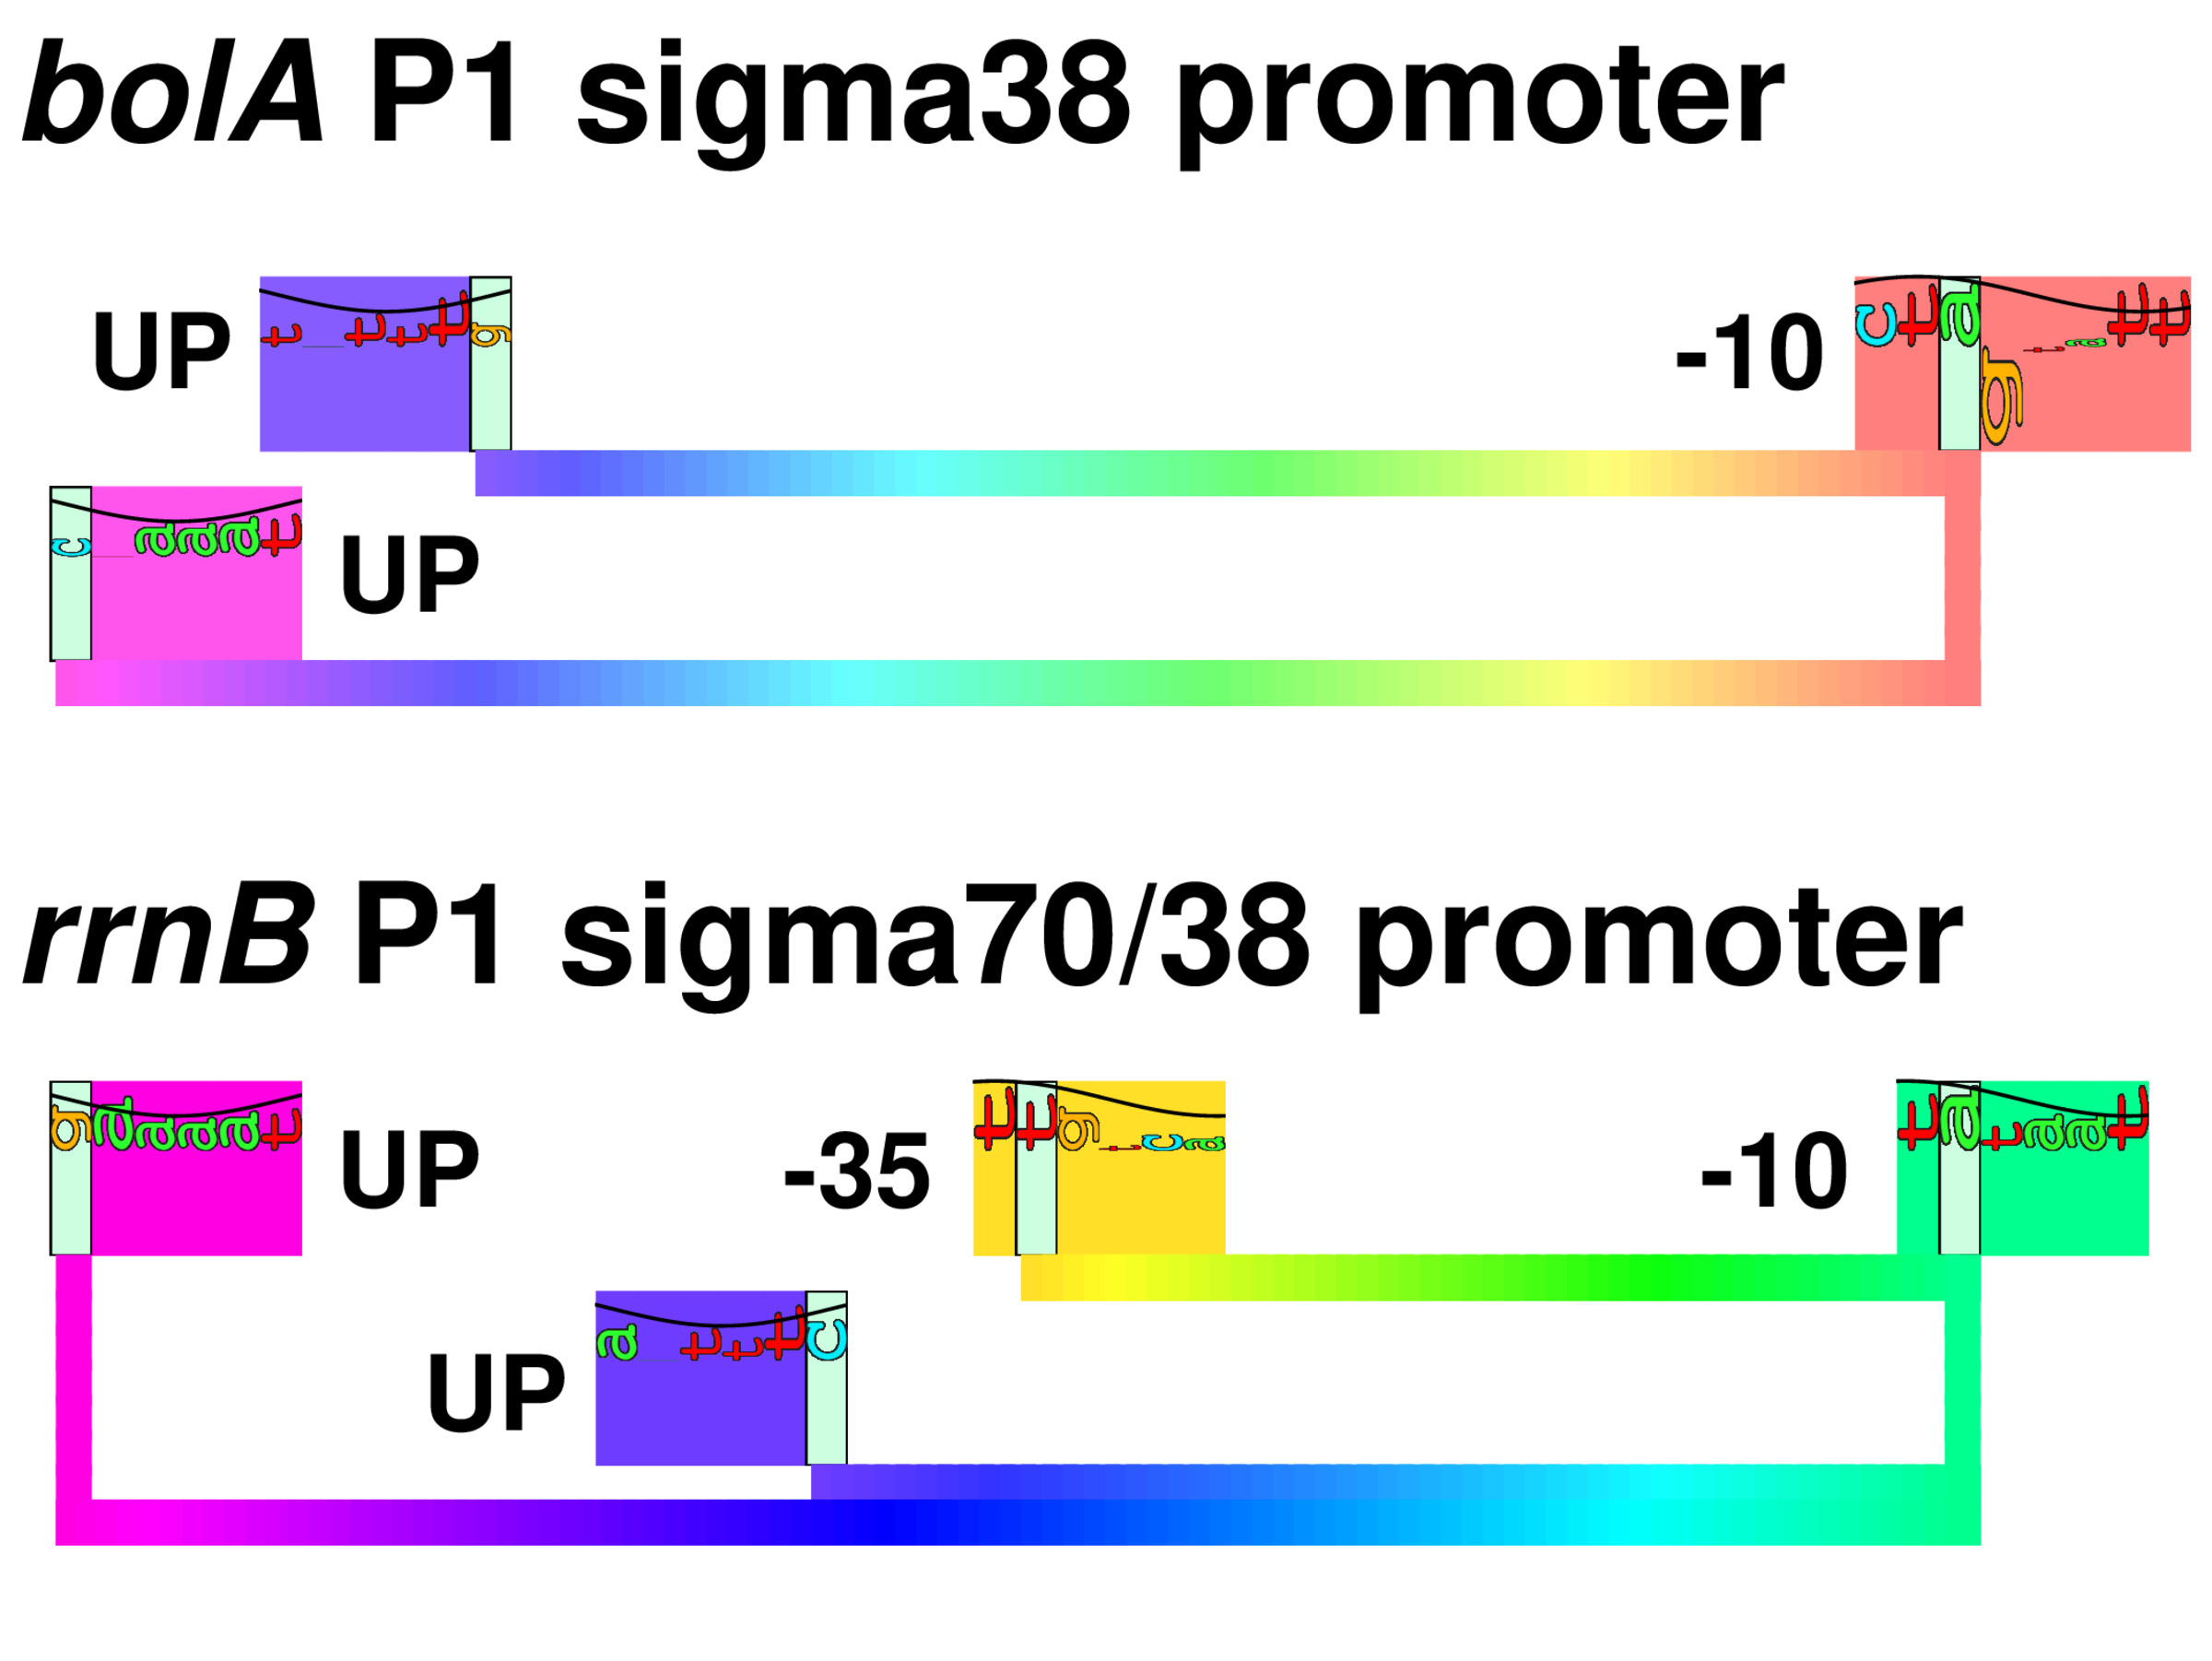 Proposed cover figure for sigma38 paper
showing sequence logos and walker for several genes